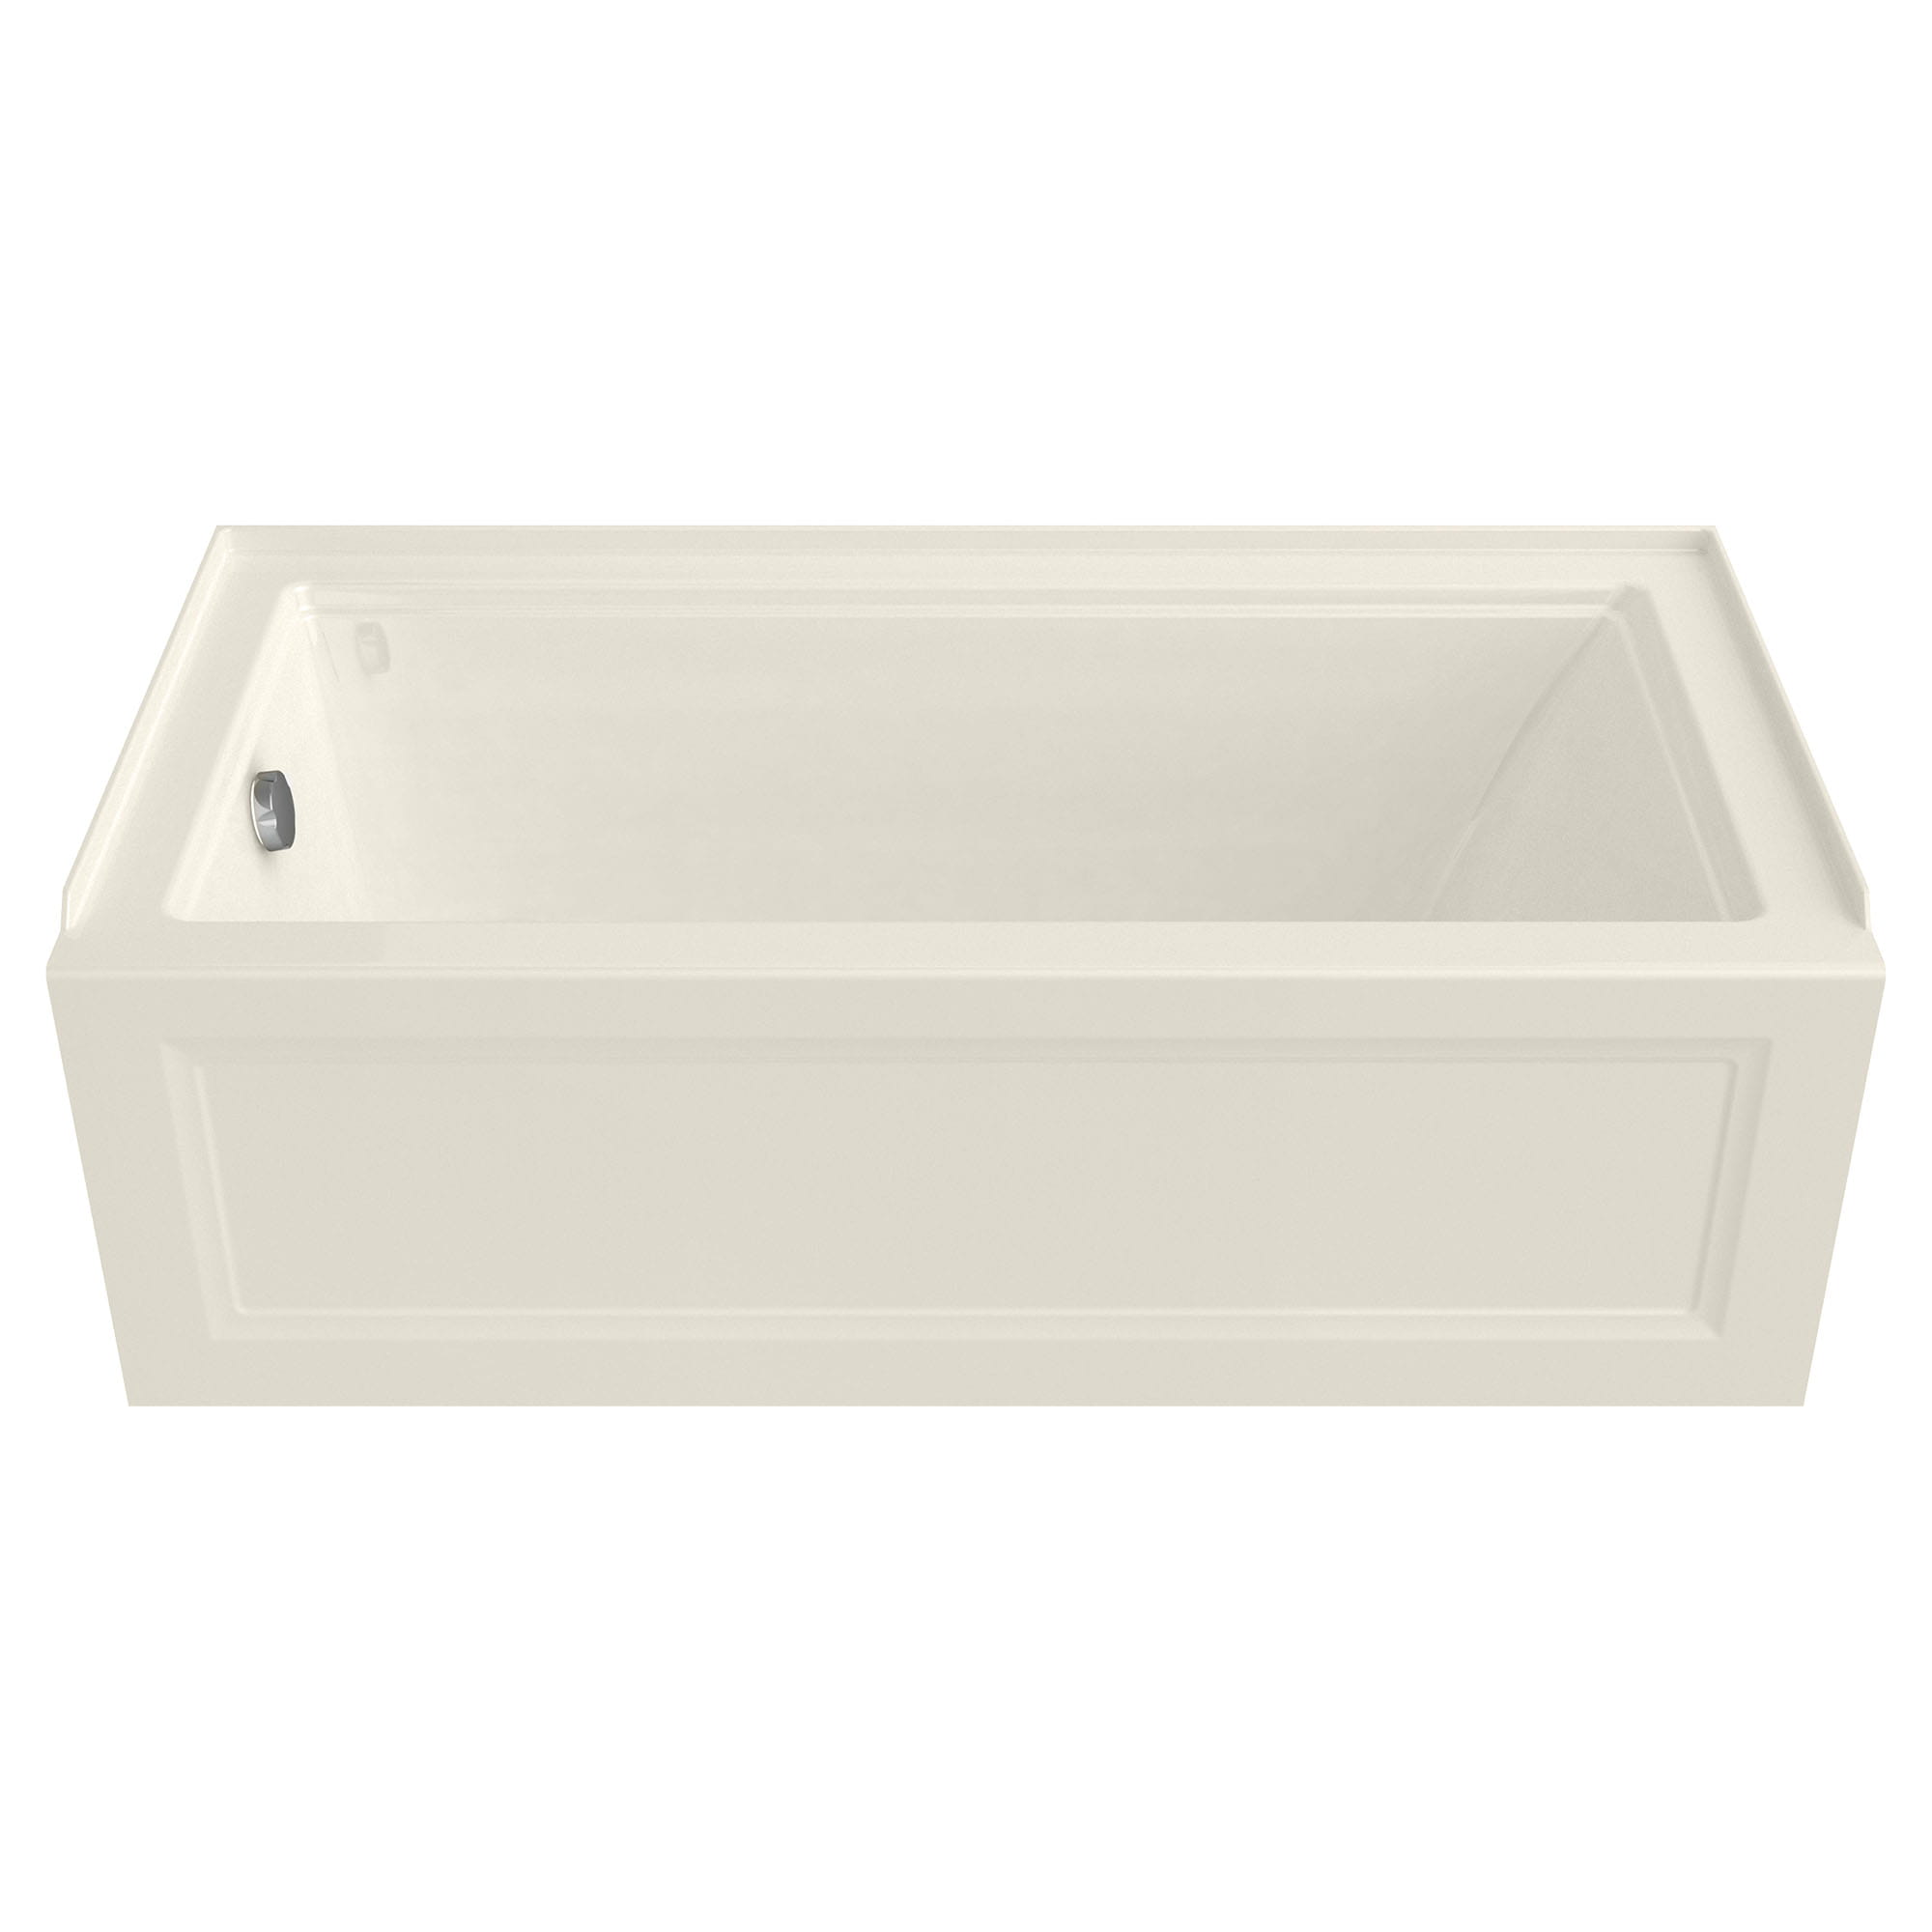 Town Square S 60 x 30 Inch Integral Apron Bathtub With Left Hand Outlet LINEN